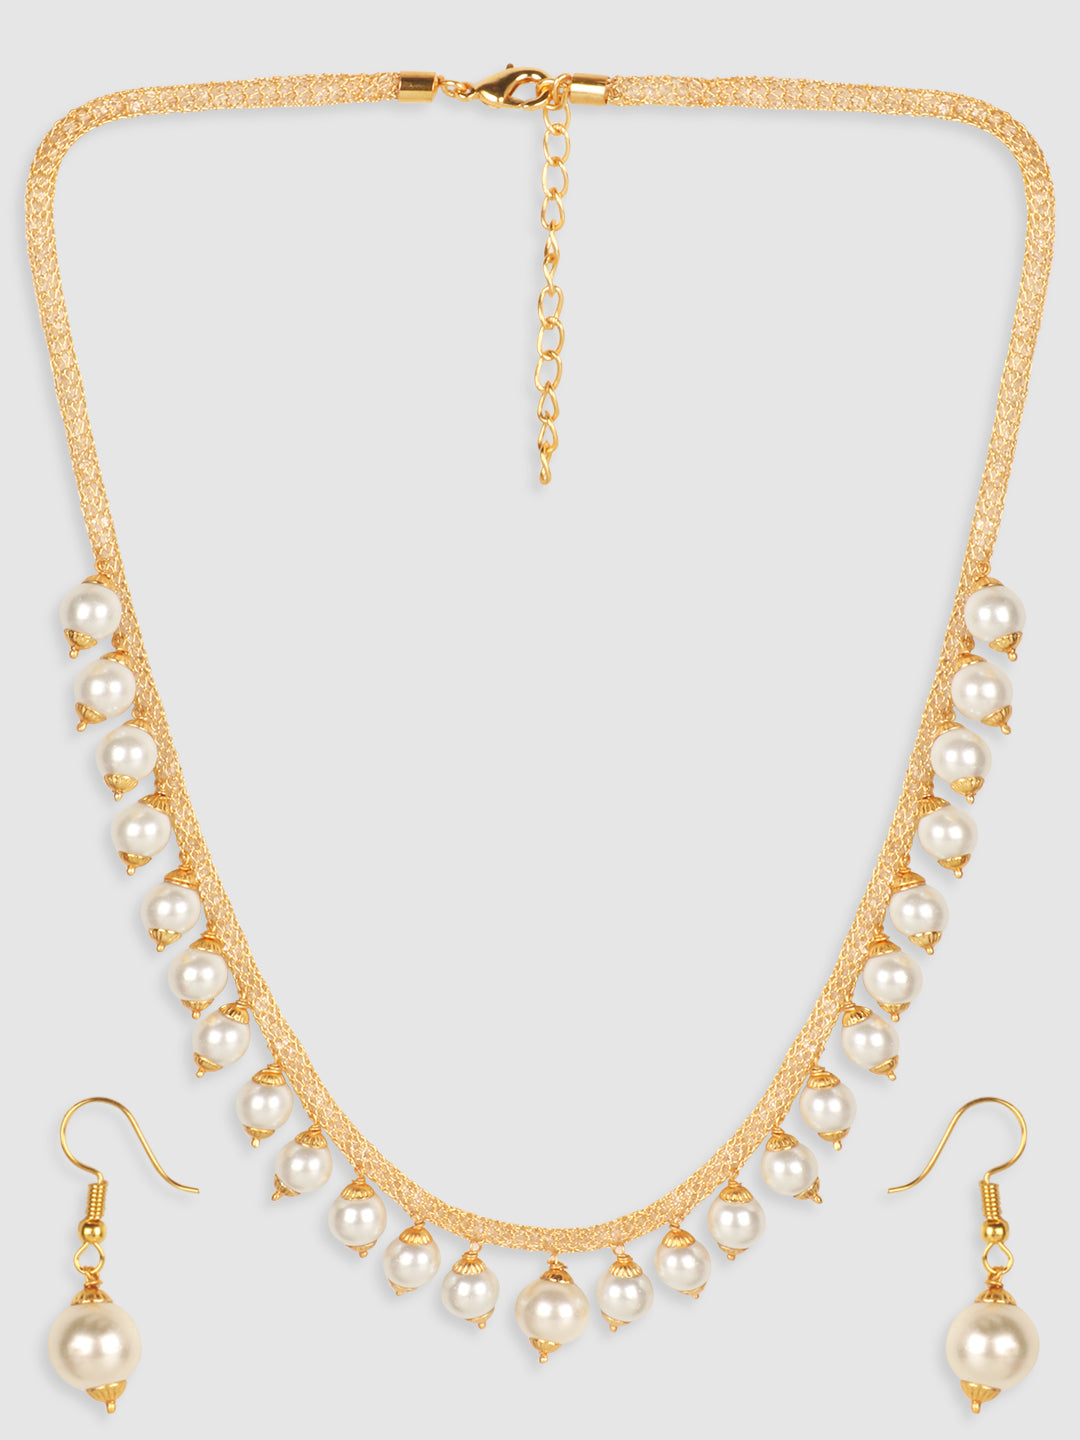 Off-White & Gold-Plated Pearl Beaded Necklace Sets